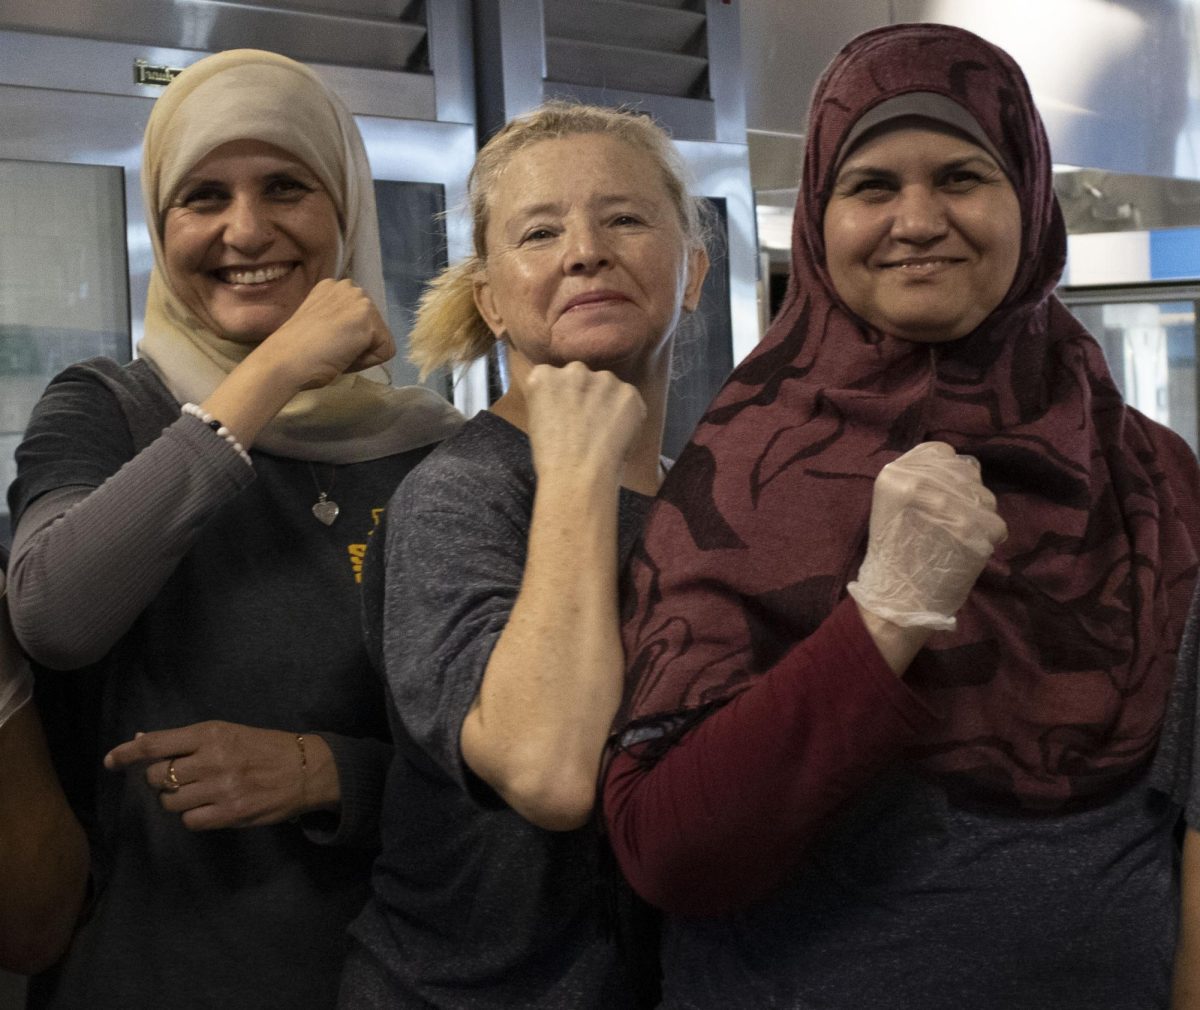  Lightridge lunch ladies Fakhar Nisa, Elizabeth Chaves and Shazma Taqeer may look nice -and, honestly, they are- but a new proposal seeks to bring them the knock out level of respect that they deserve.